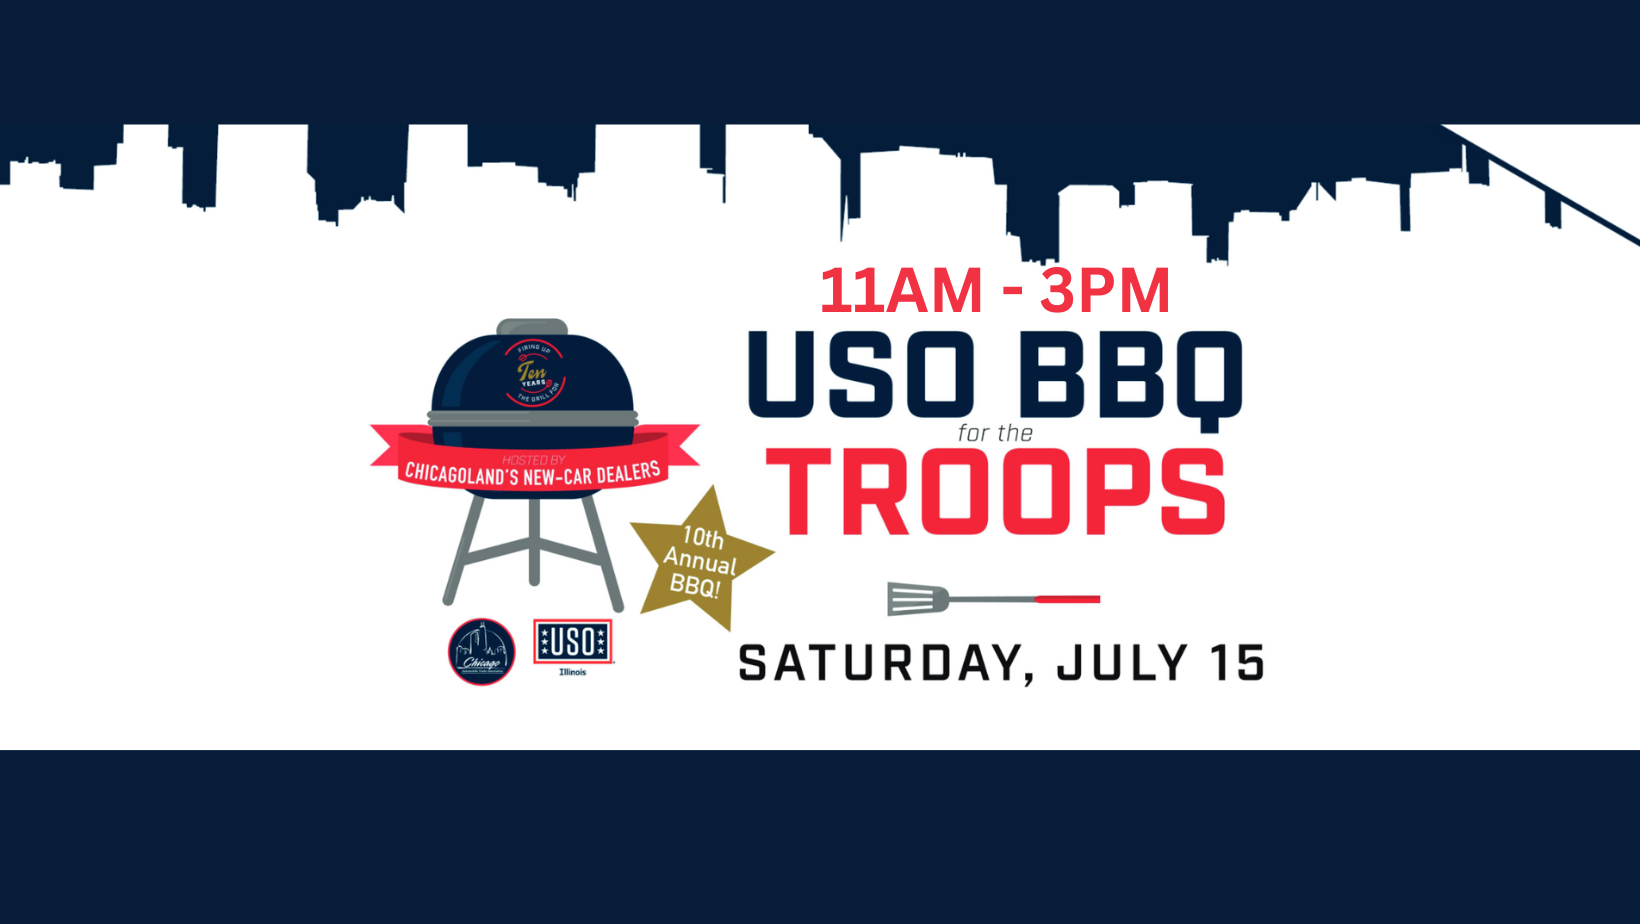 11AM to 3 PM USO BBQ for the Troops on Saturday, July 15